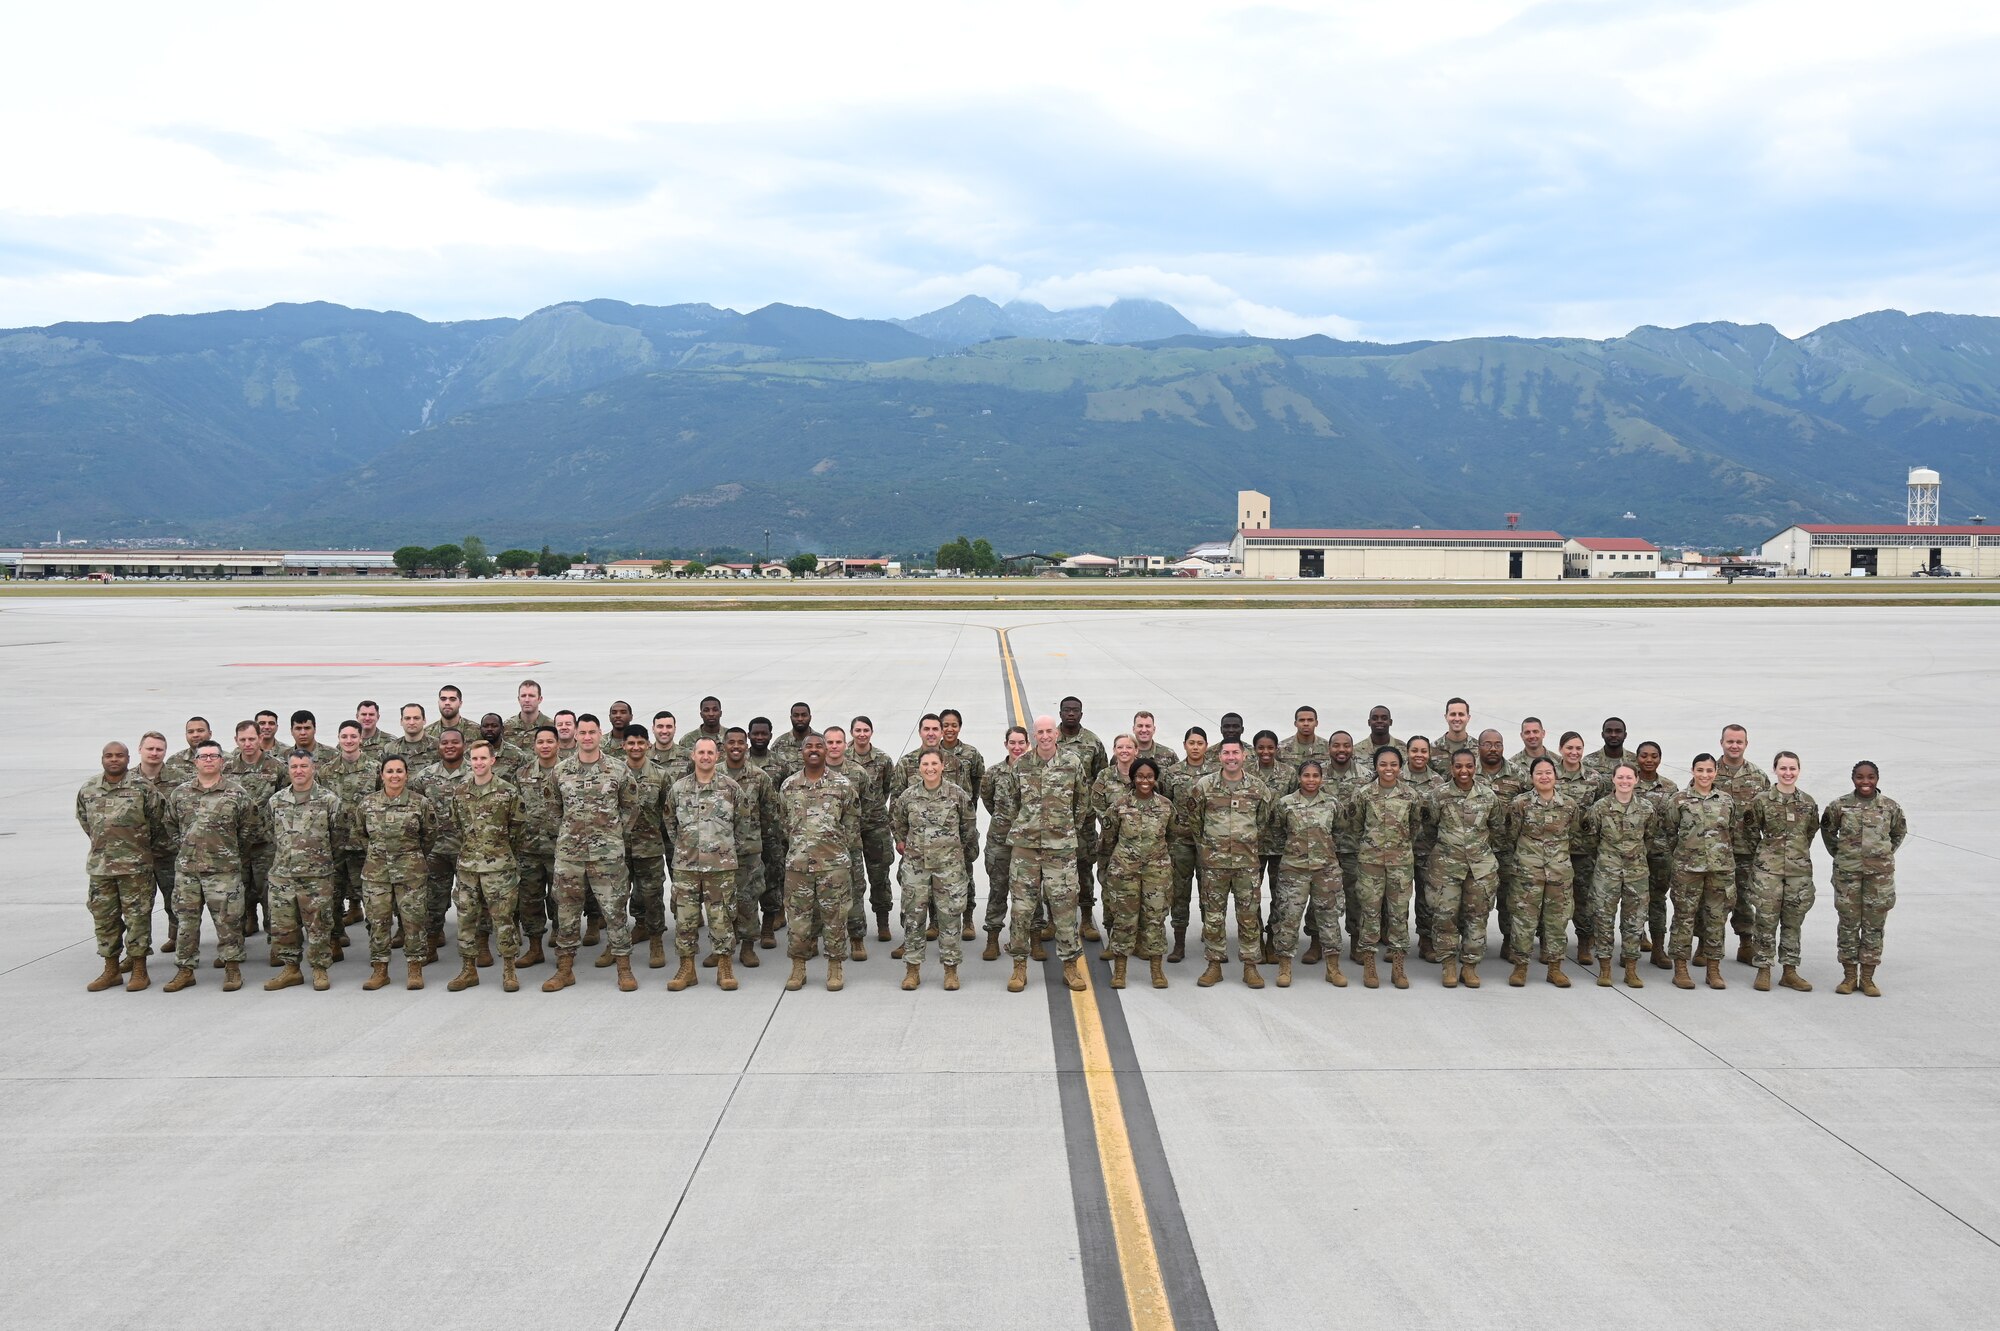 Members of the 175th Wing, Maryland Air National Guard, pose for a group photograph during annual training at Aviano Air Base, Italy, July 28, 2022.